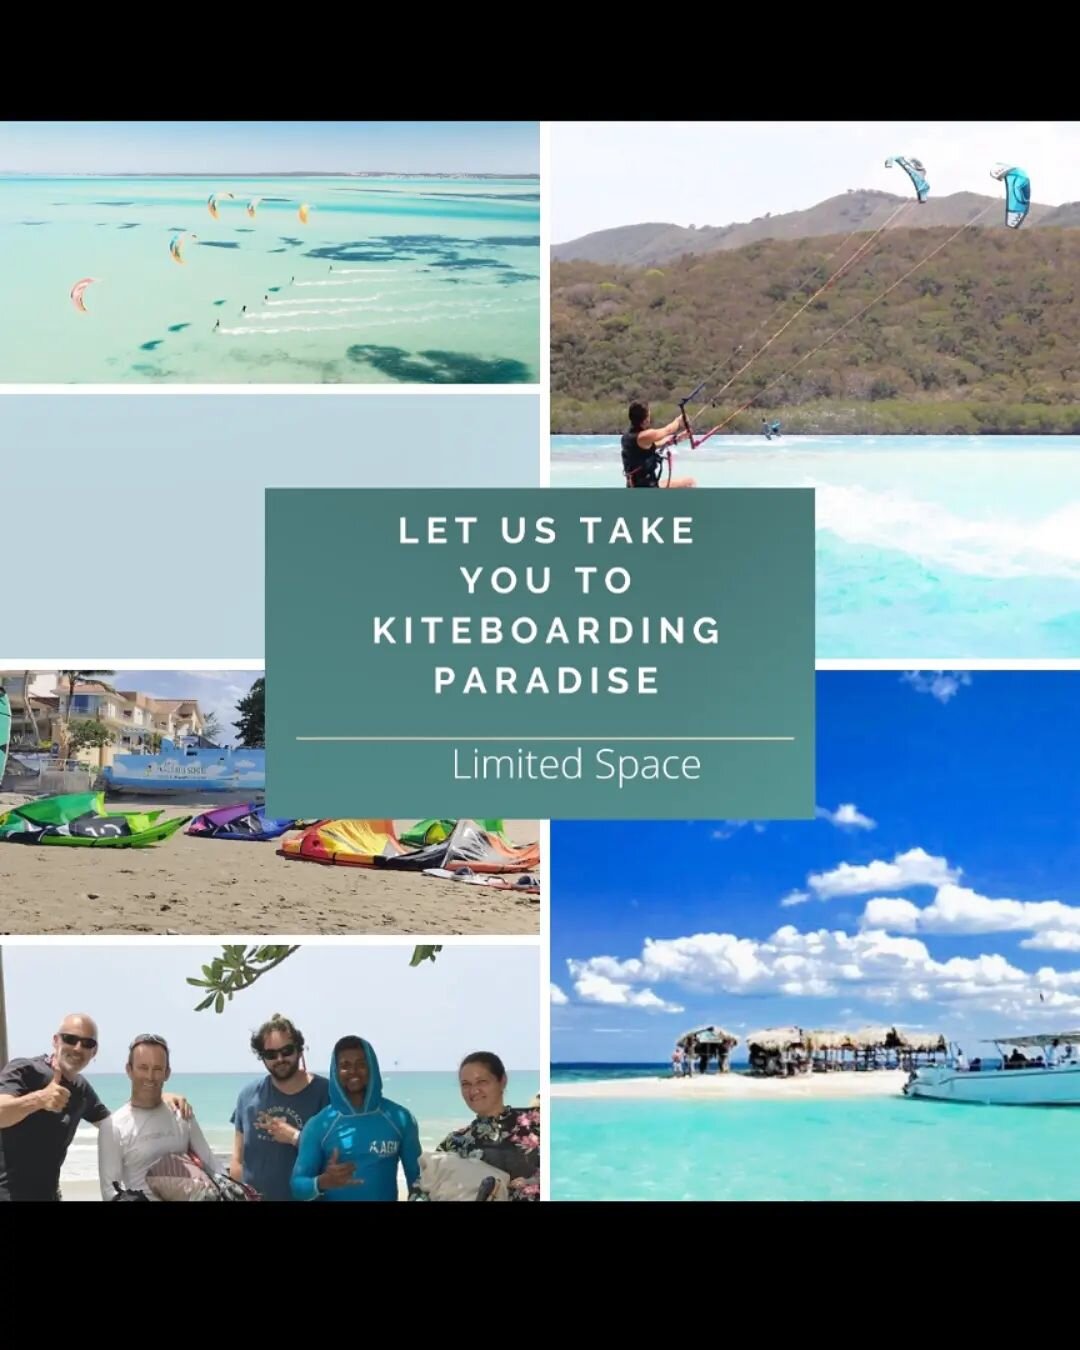 Come and join us to this amazing down wind trip to buen hombre. ⛱️

We have packages available:

1 Day trip 150$ us includes transportation, meals and IKO certified instructor.
☀️
2 Day trip 250$ US includes, transportation, meal, Hotel Stay and IKO 